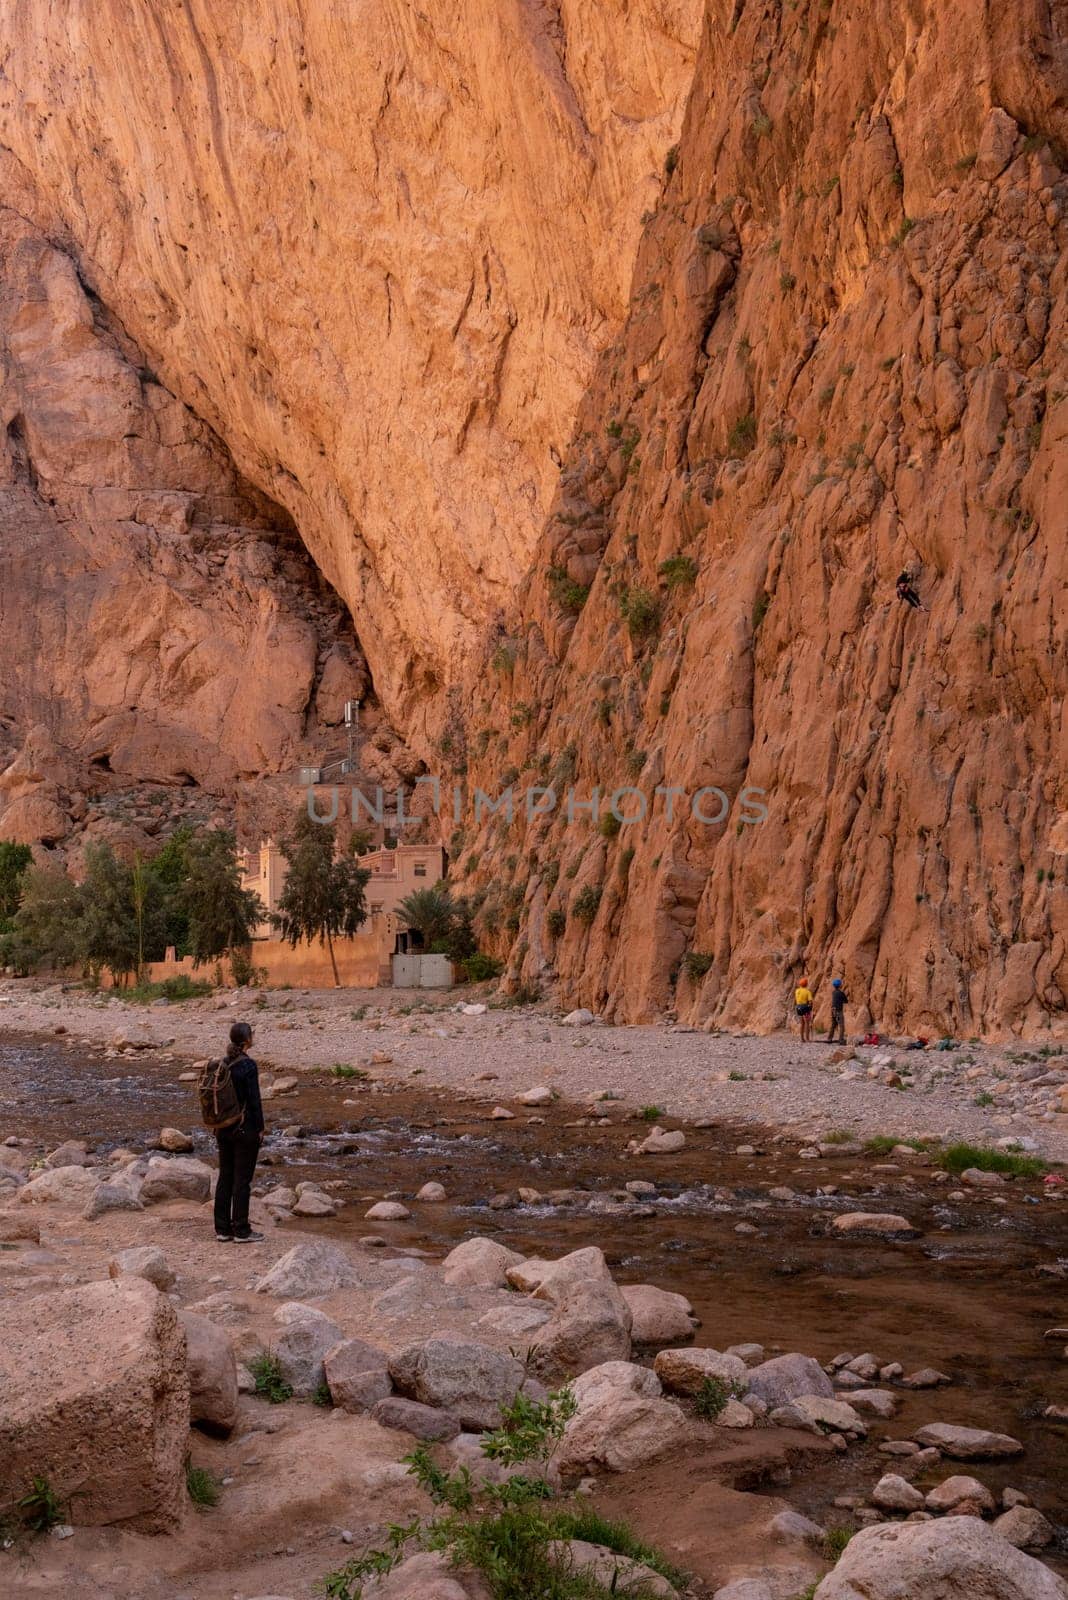 Impressive steep Todra gorge in the Atlas mountains of Morocco